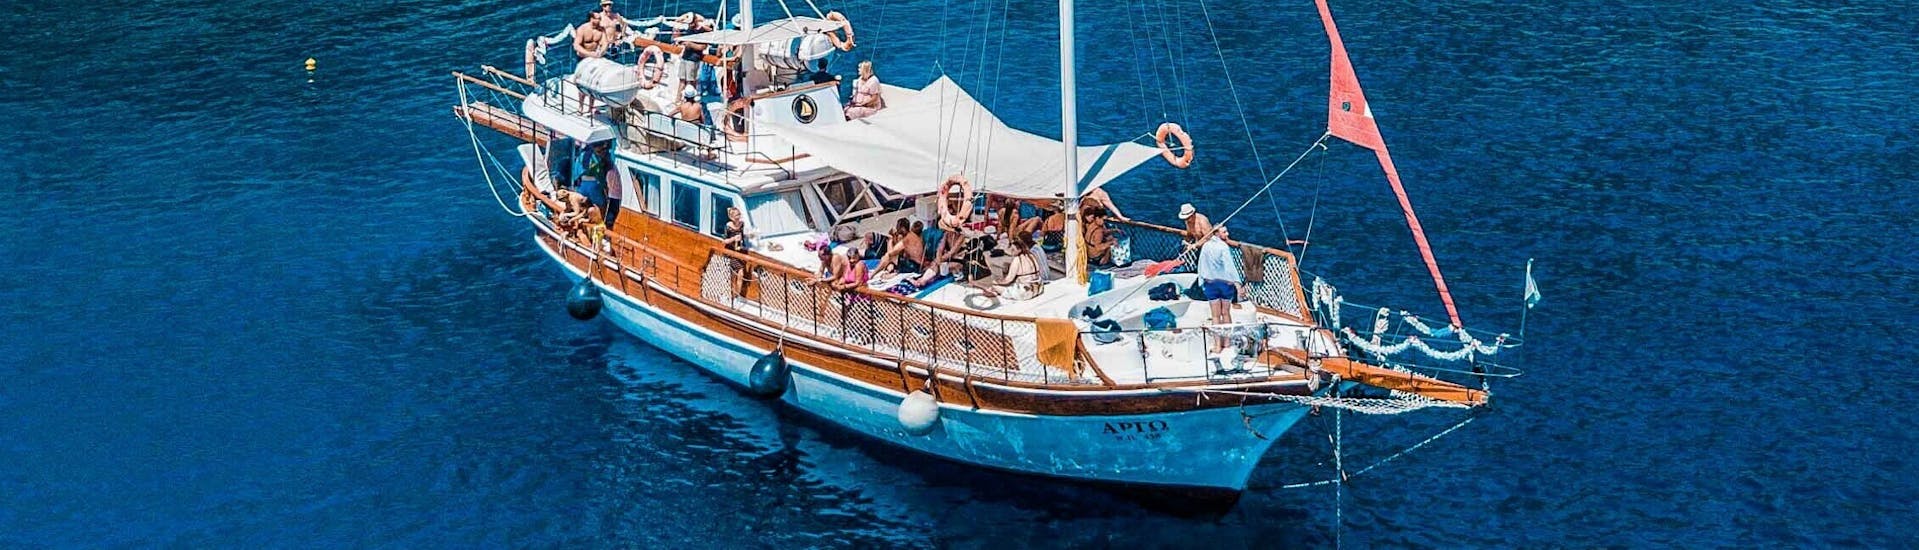 Sailing boat on the sea during the All Inclusive Boat Trip to Anthony Quinn Bay & Kallithea Springs with Snorkeling with Royal Sailing Rhodes.